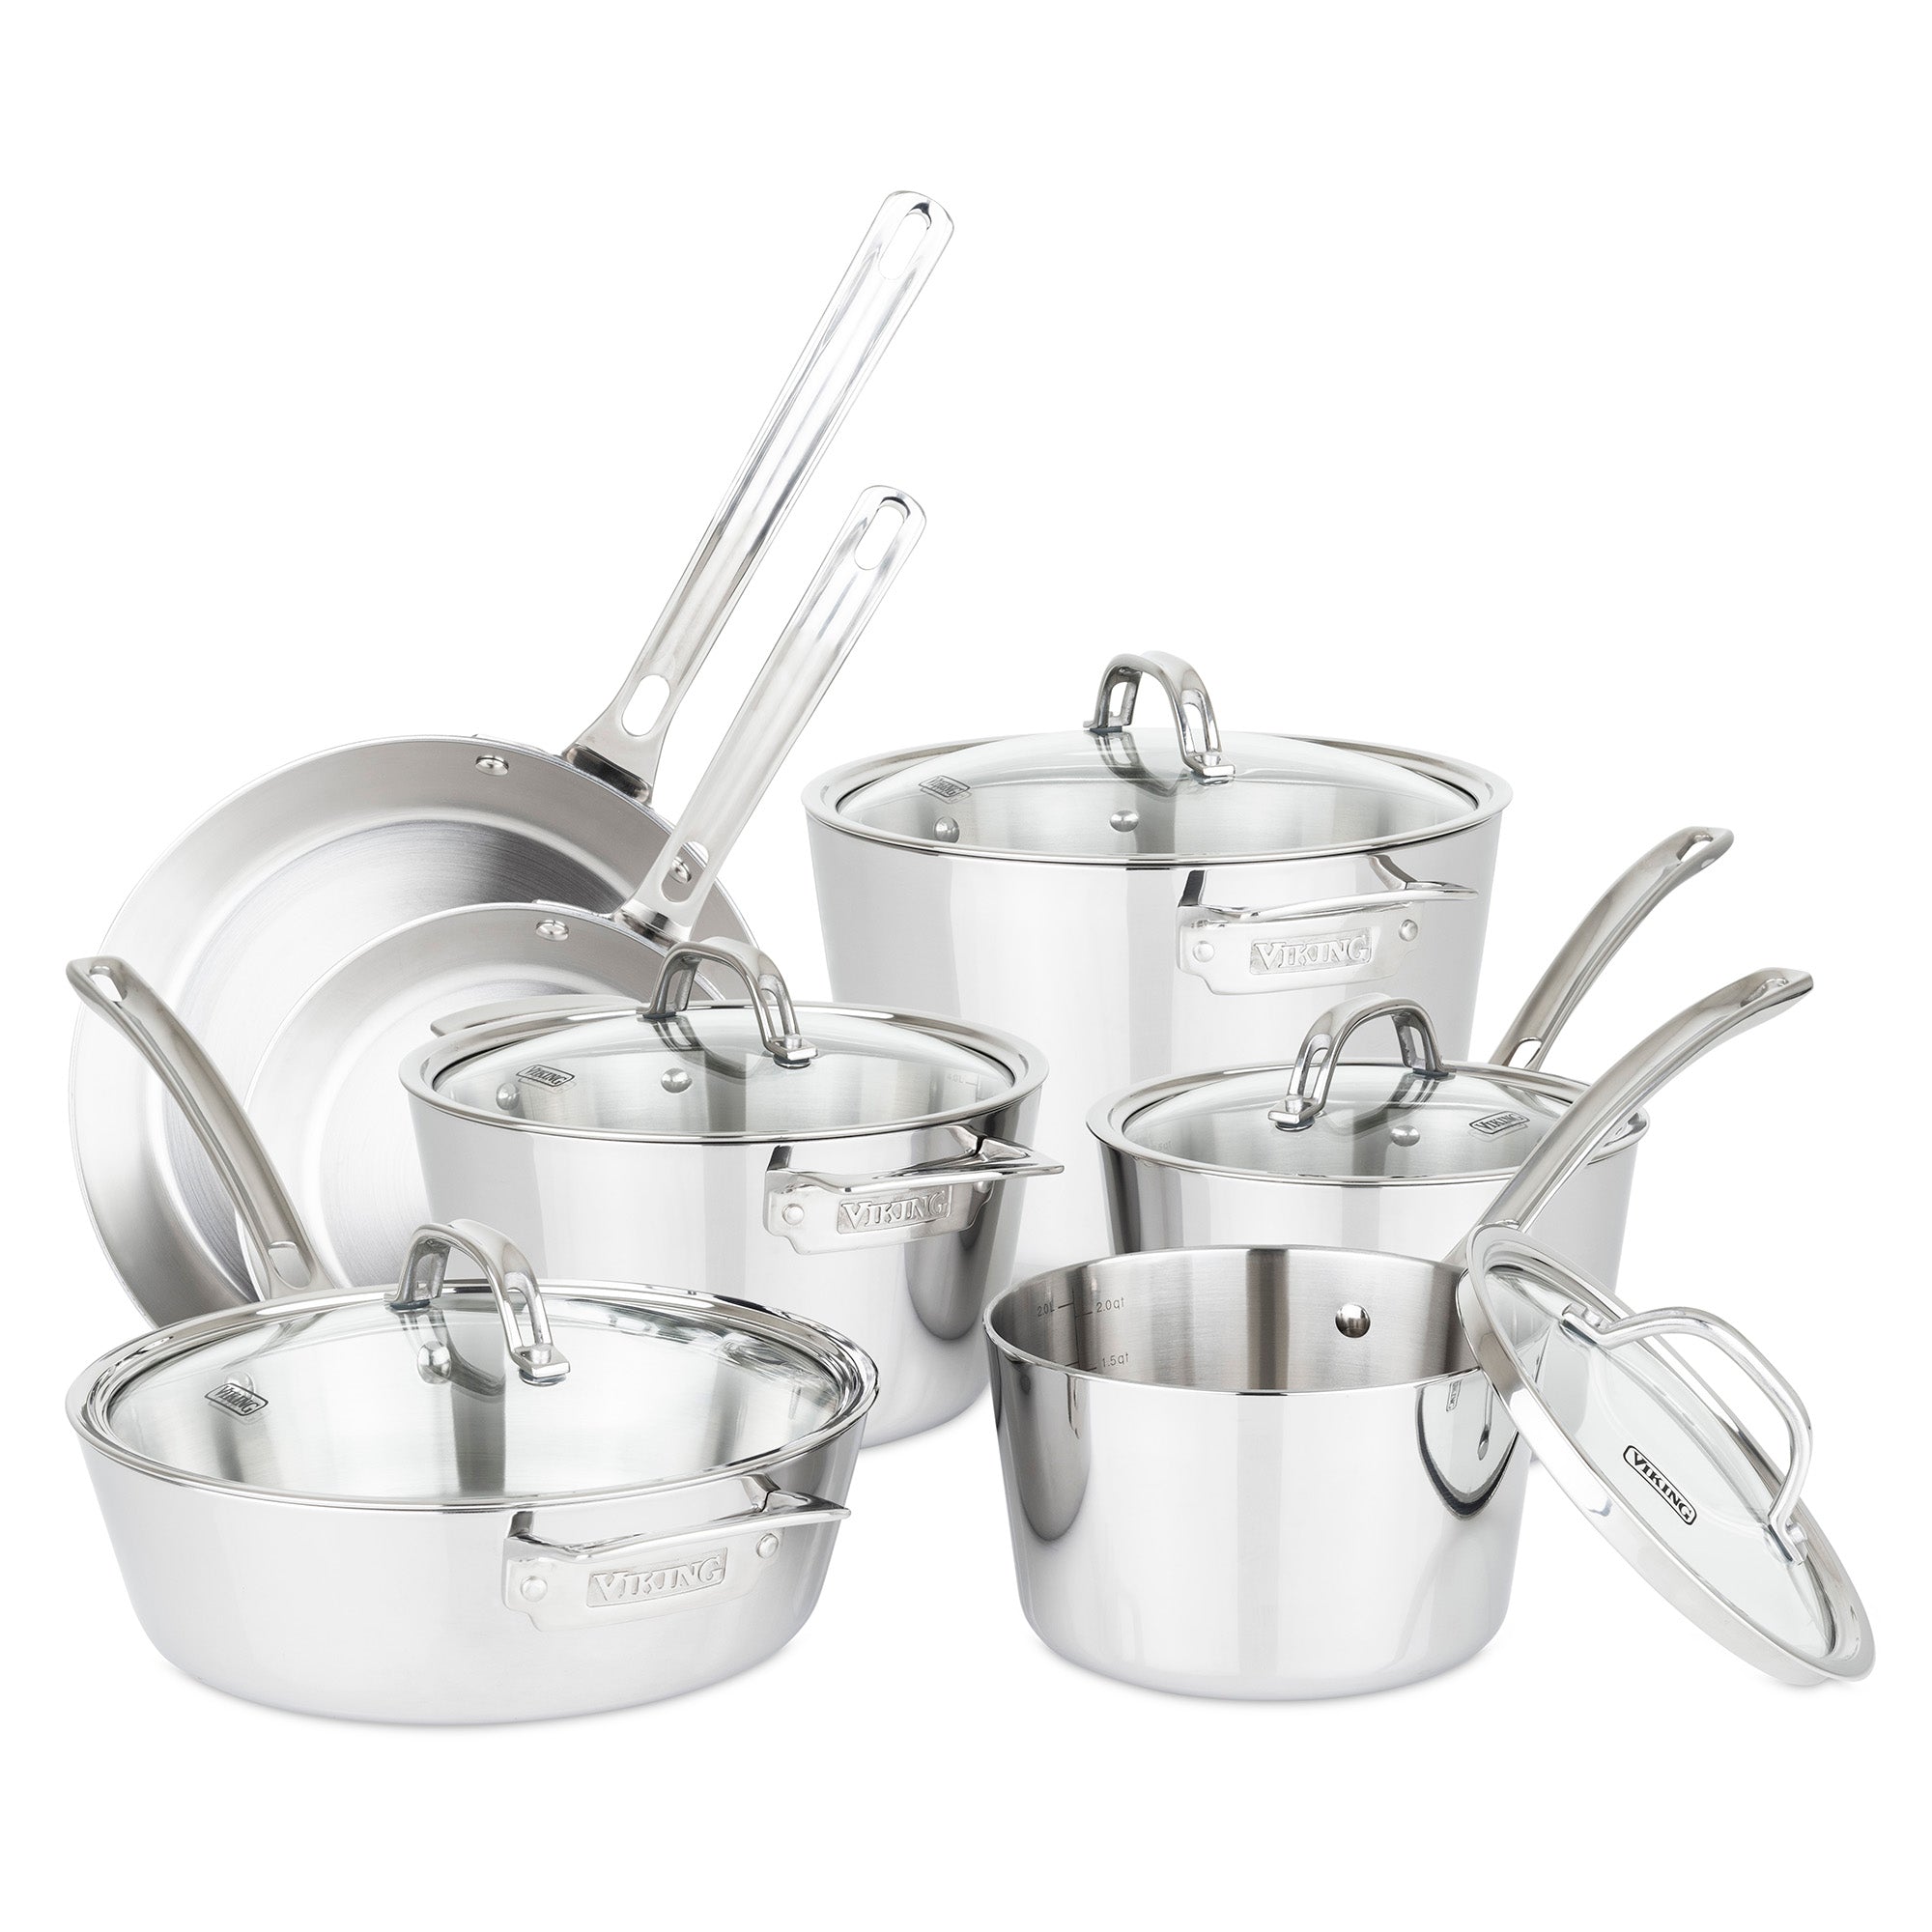 Best Reviewed Cookware Set | 6-Pieces | Limited Lifetime Warranty | Made in